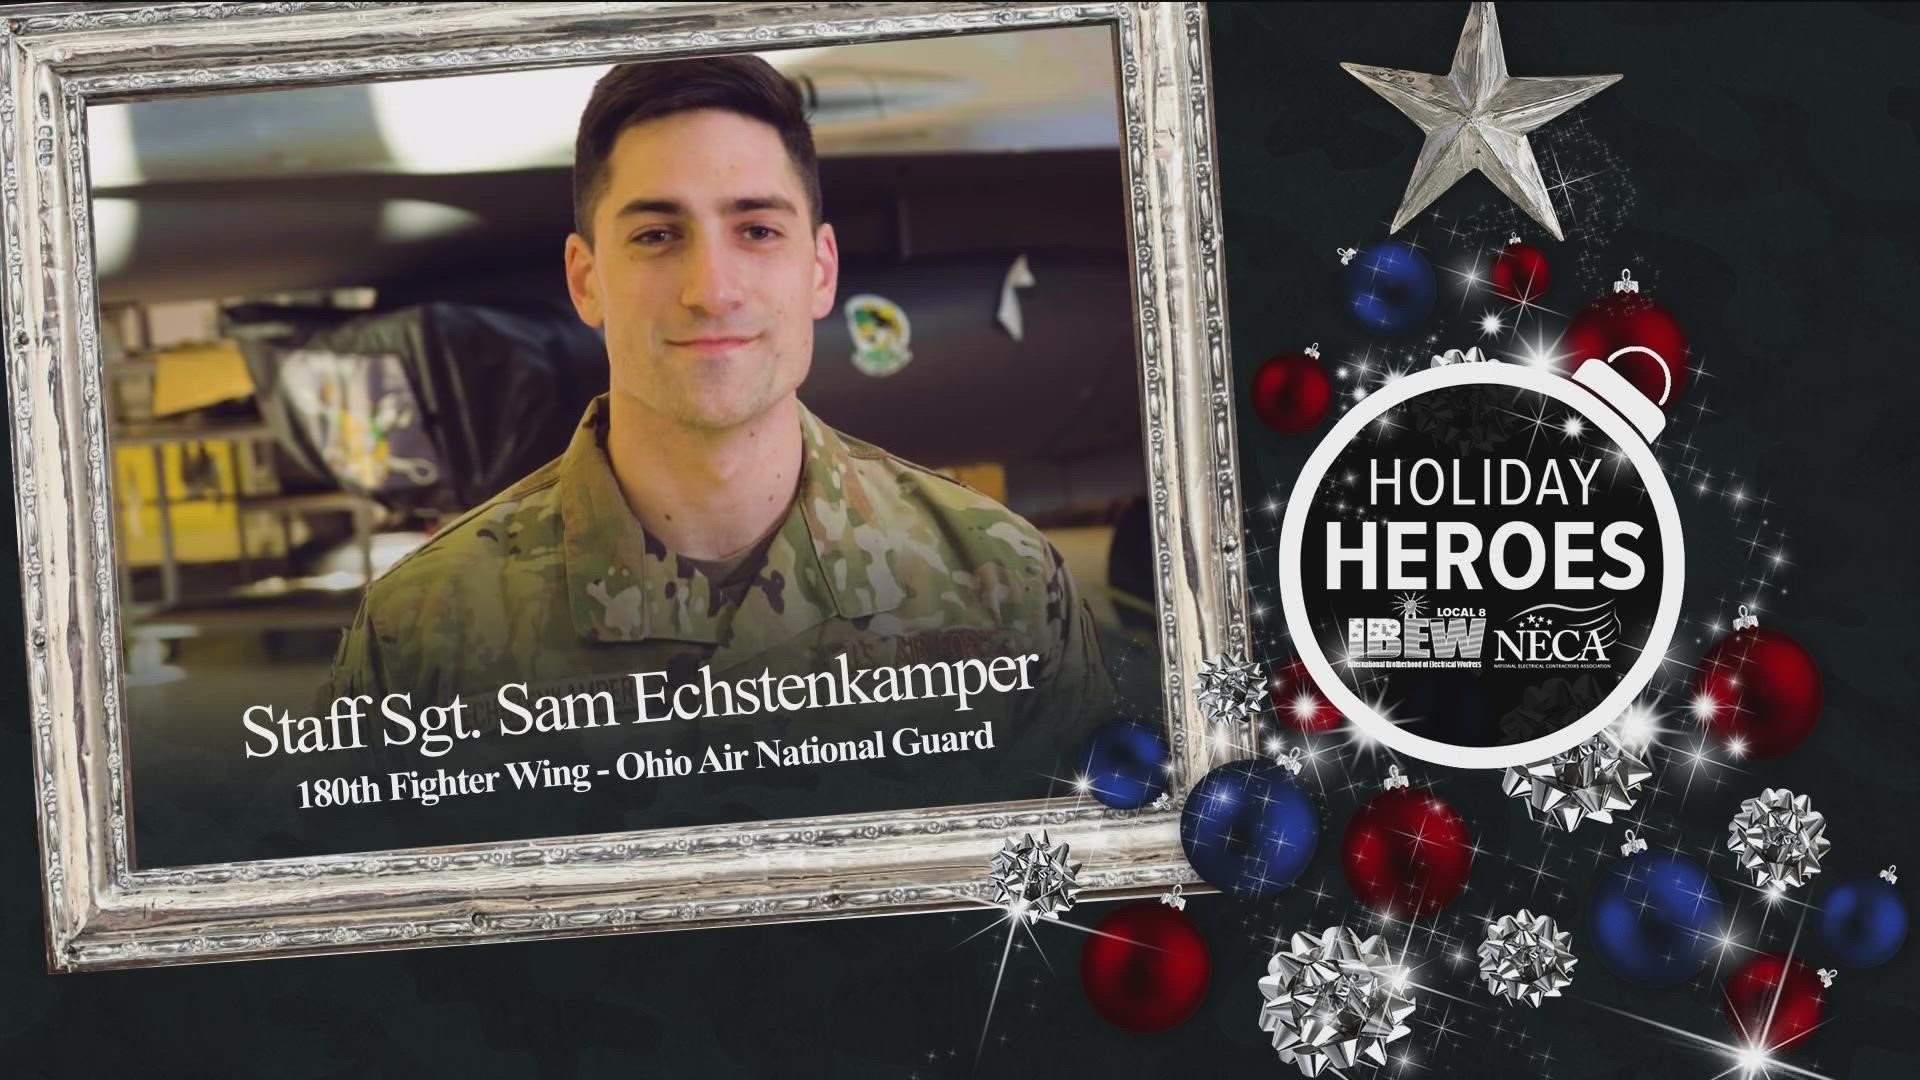 WTOL 11 continues to honor Holiday Heroes with a message from Staff Sgt. Sam Echstenkamper of the Ohio Air National Guard's 180th Fighter Wing.